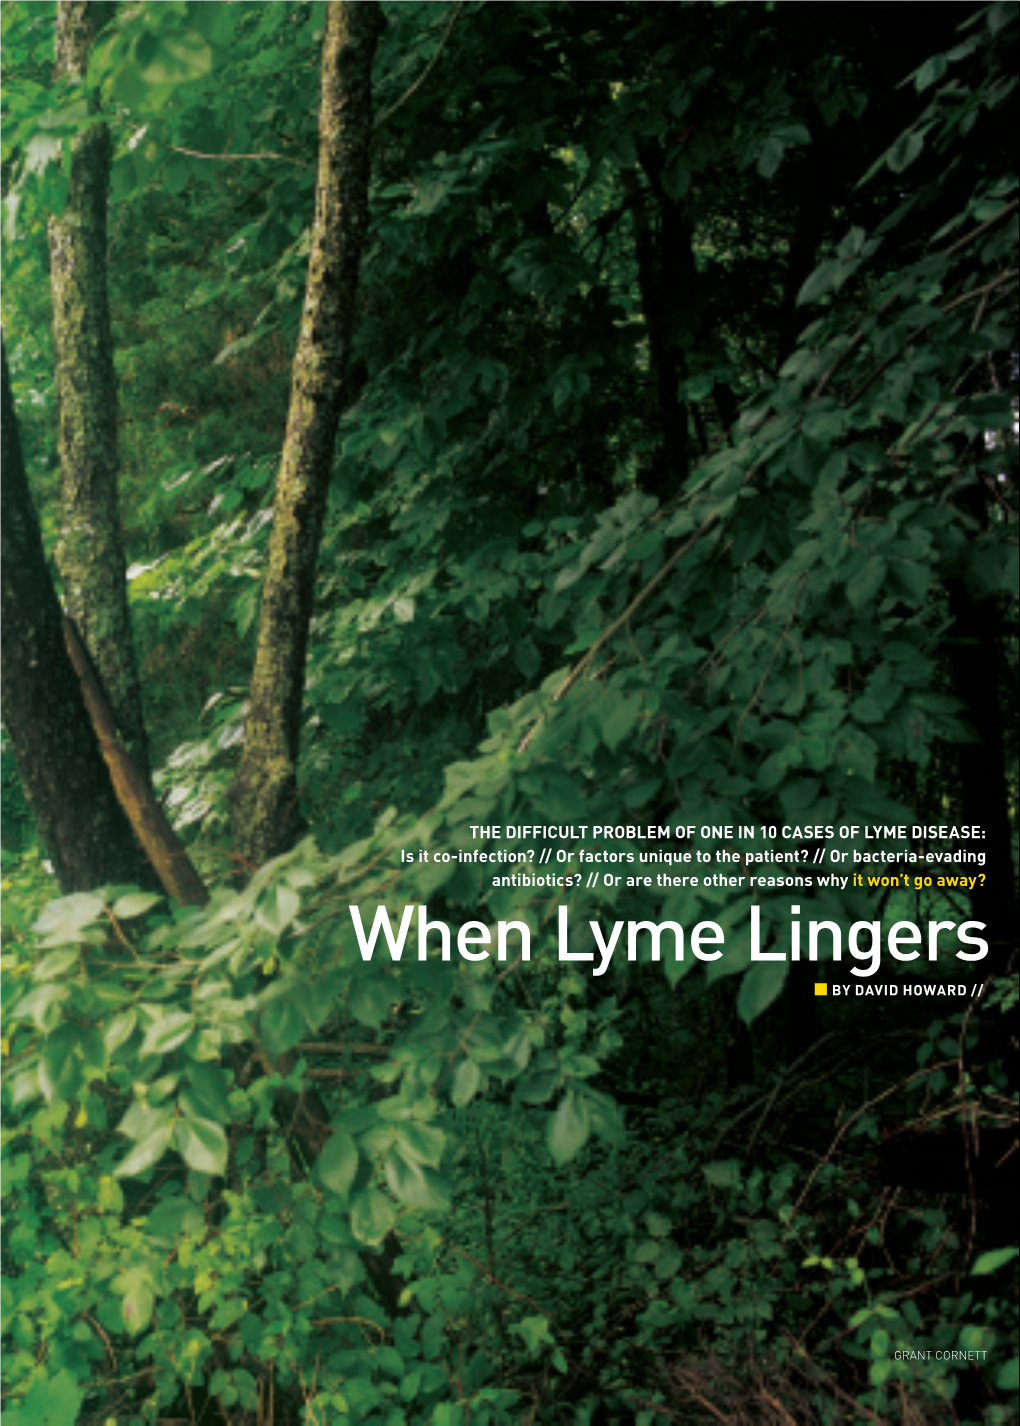 When Lyme Lingers BY DAVID HOWARD